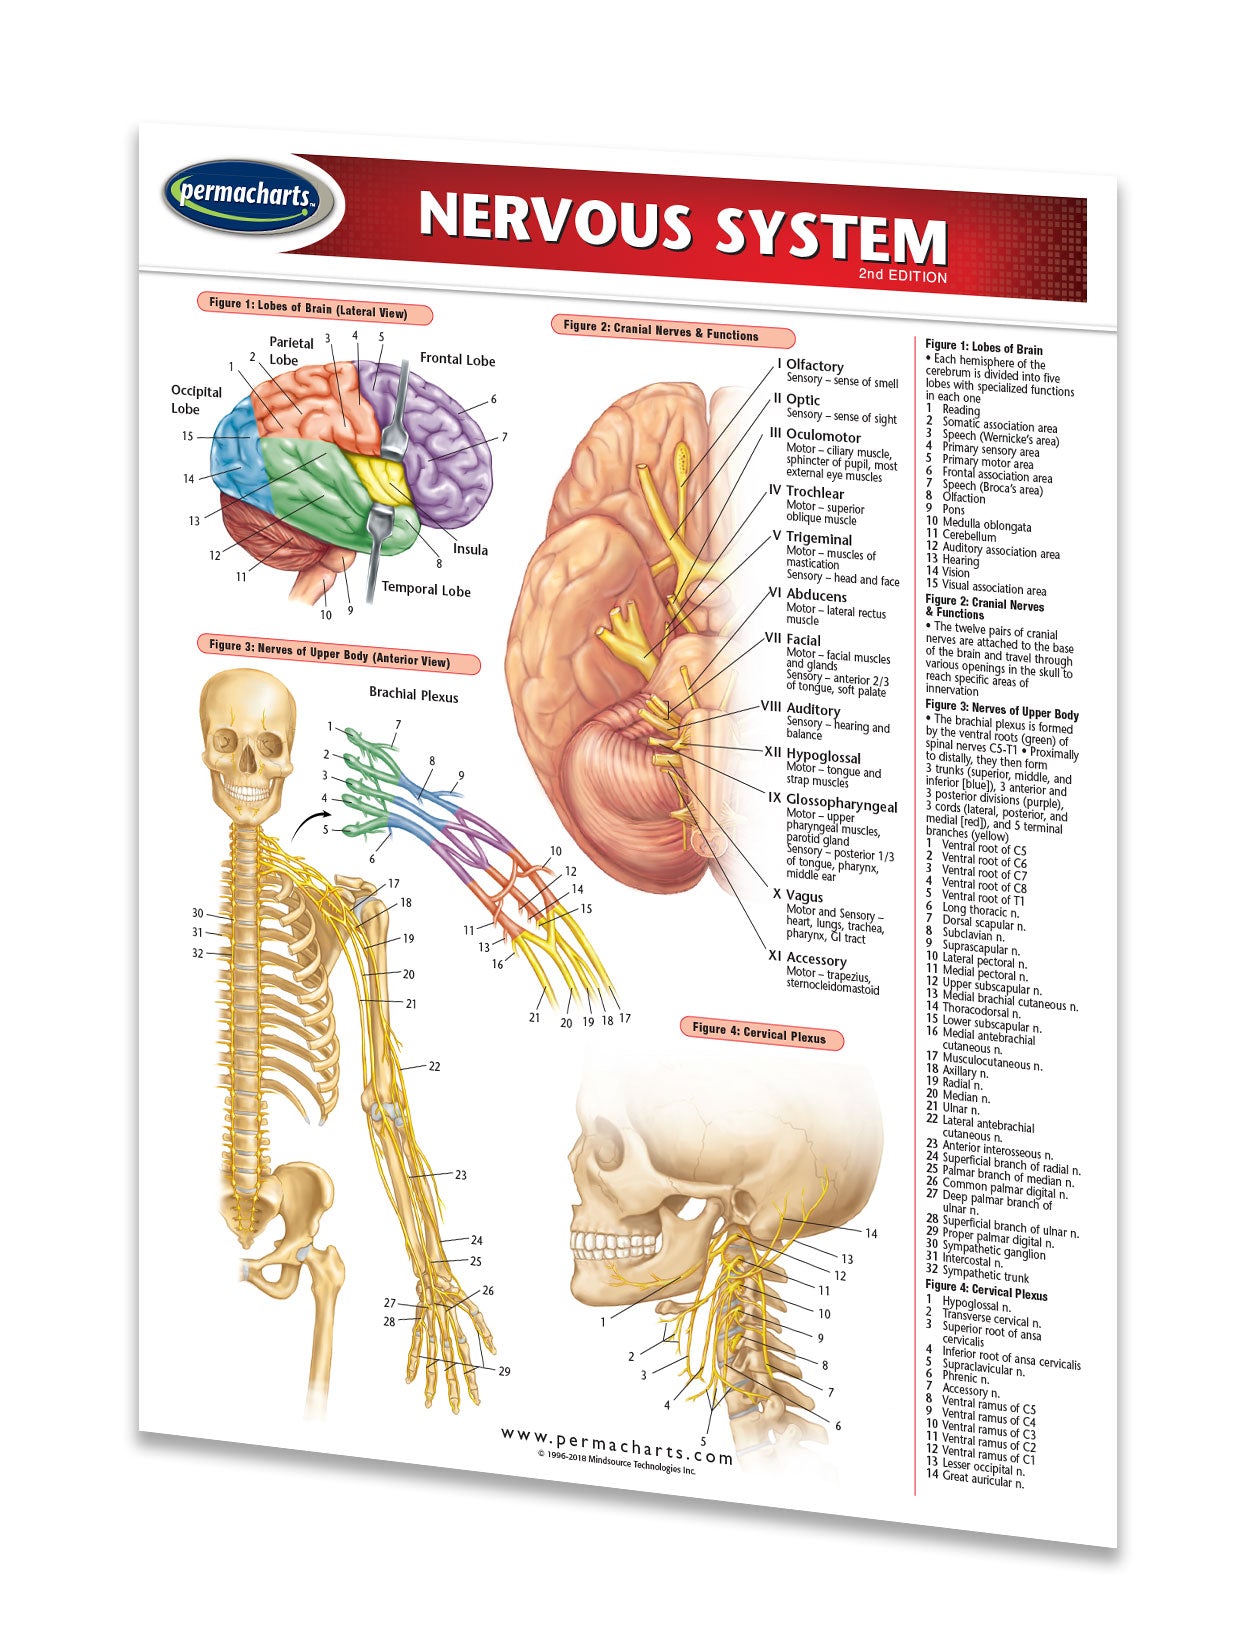 Nervous System Study Guide - Quick Reference Resource